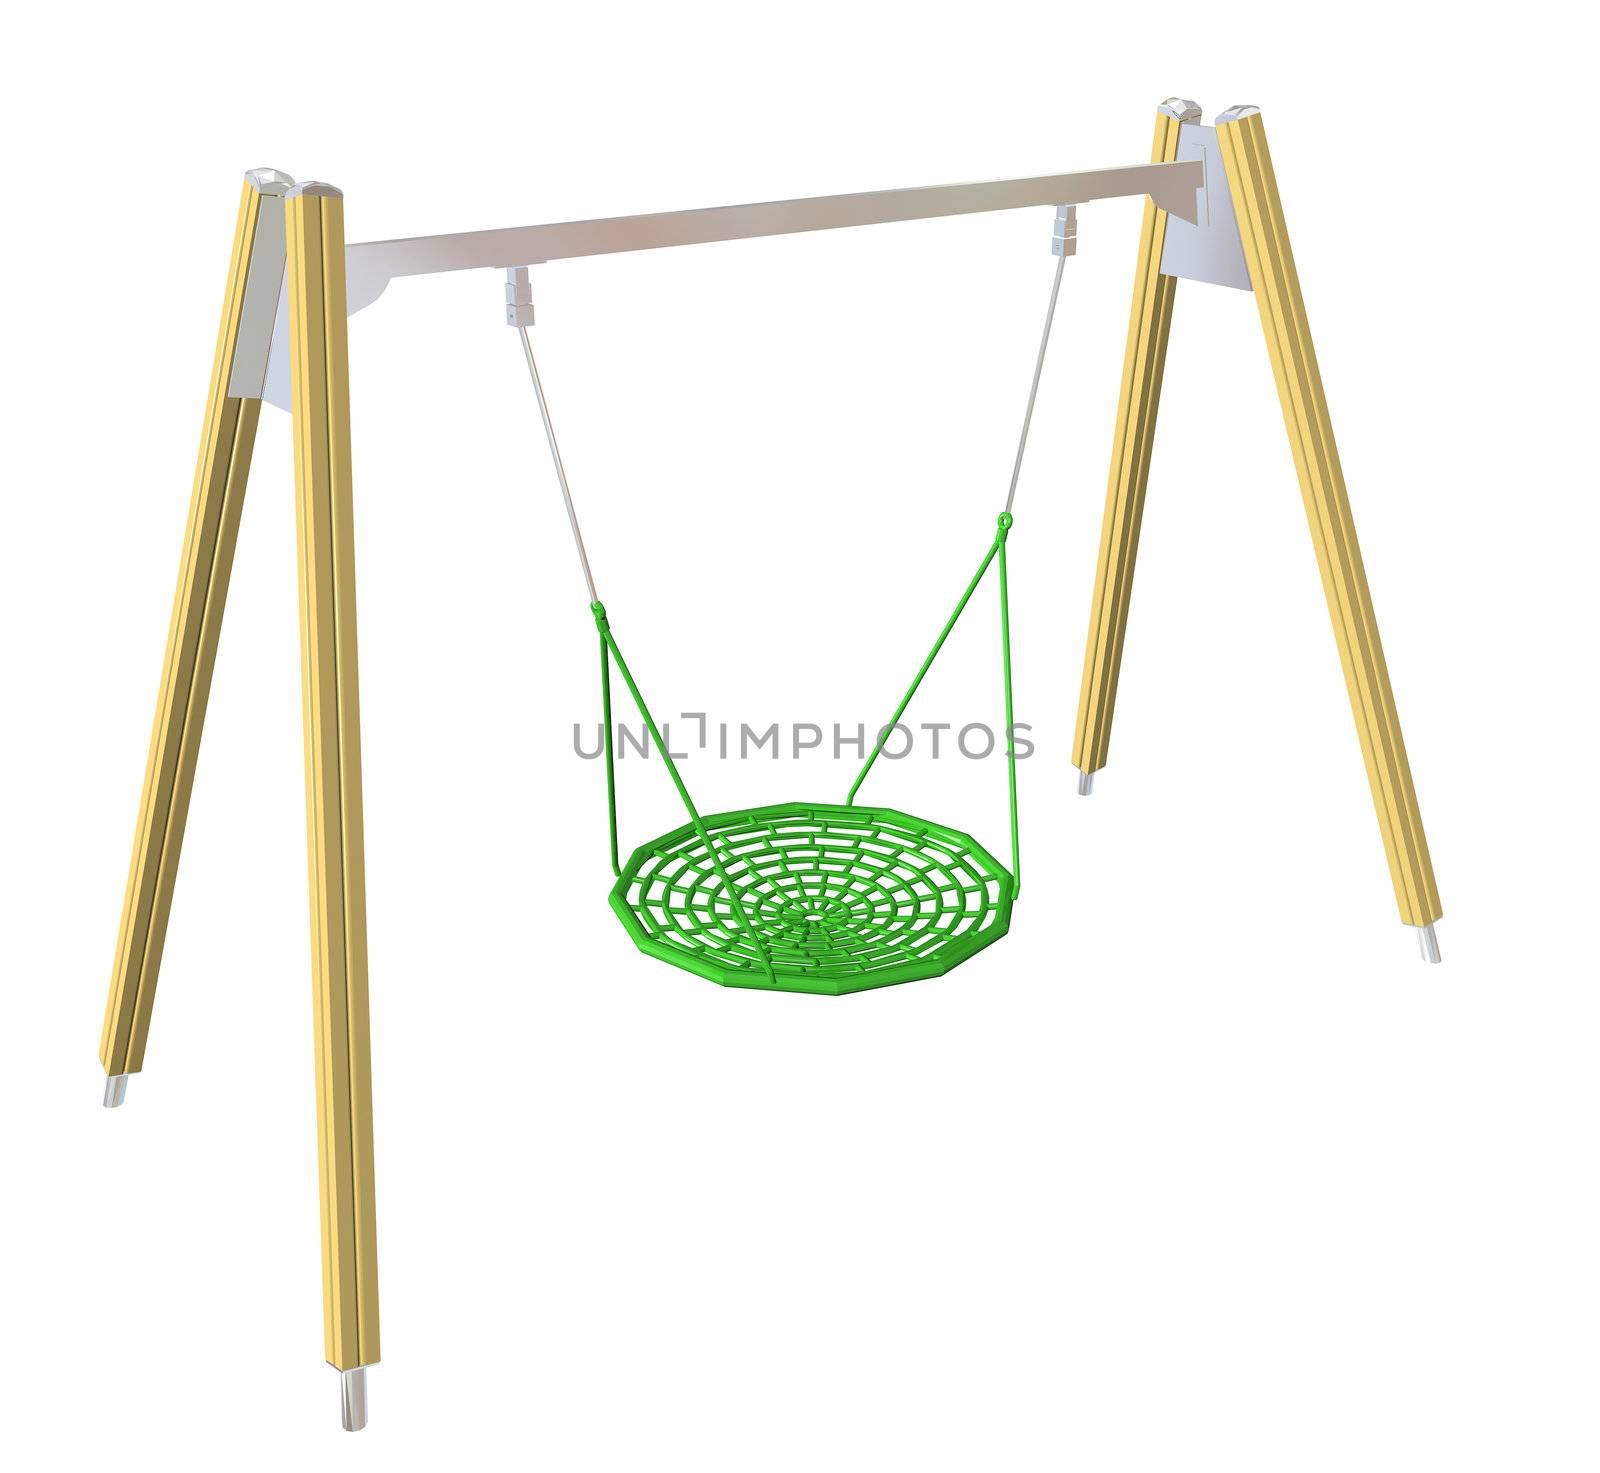 Netted swing, yellow and green, 3D illustration, isolated against a white background.